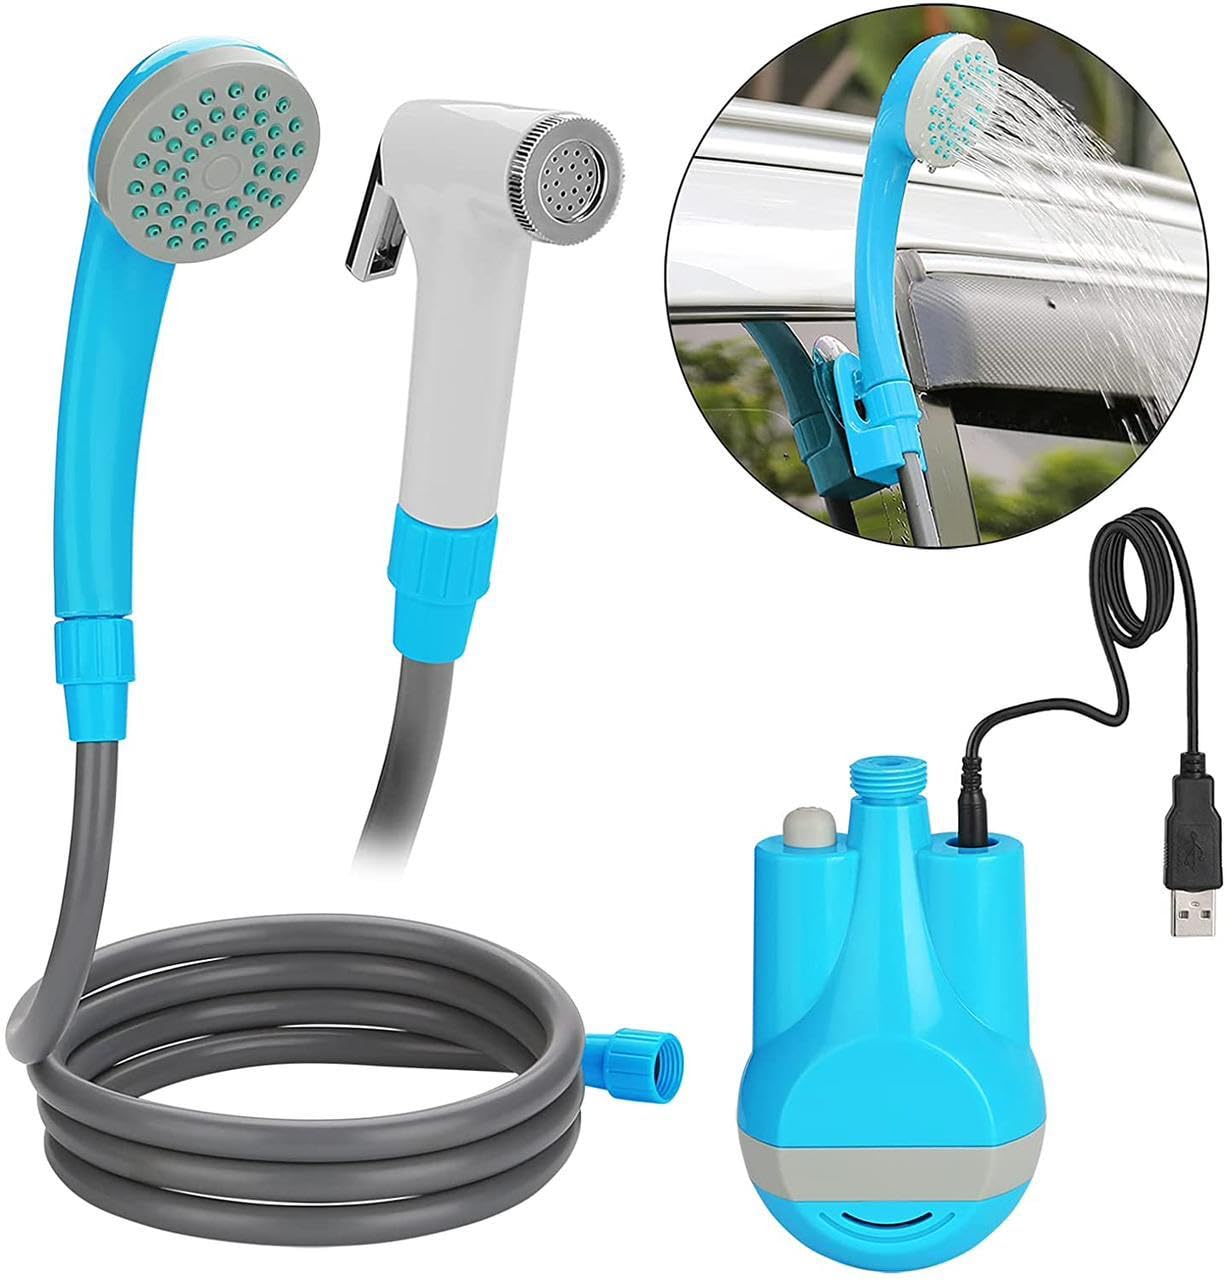 PGT-STORE Portable Camping Shower, Travel Shower Outdoor Portable Shower Head 2200 mAH Rechargeable Battery USB Cable